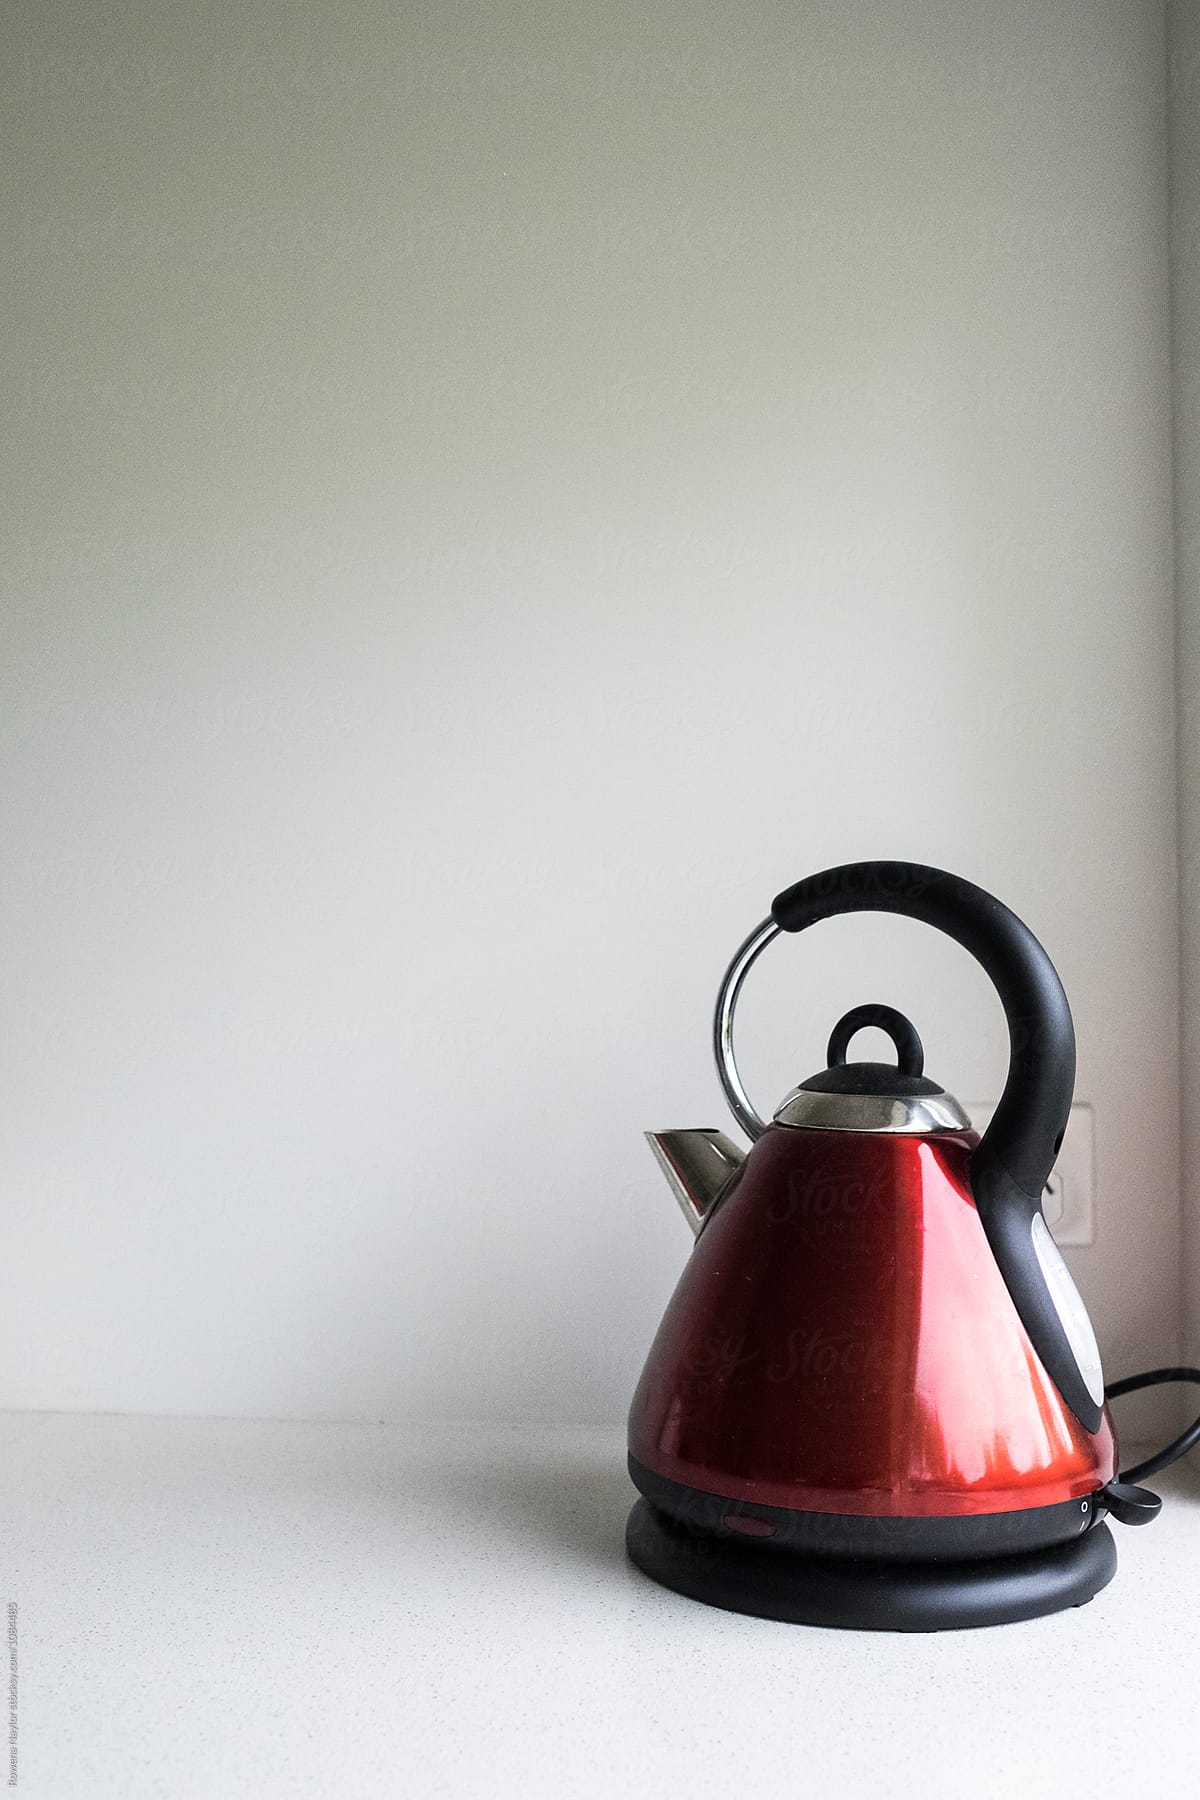 Red electric kettle on white kitchen benchtop